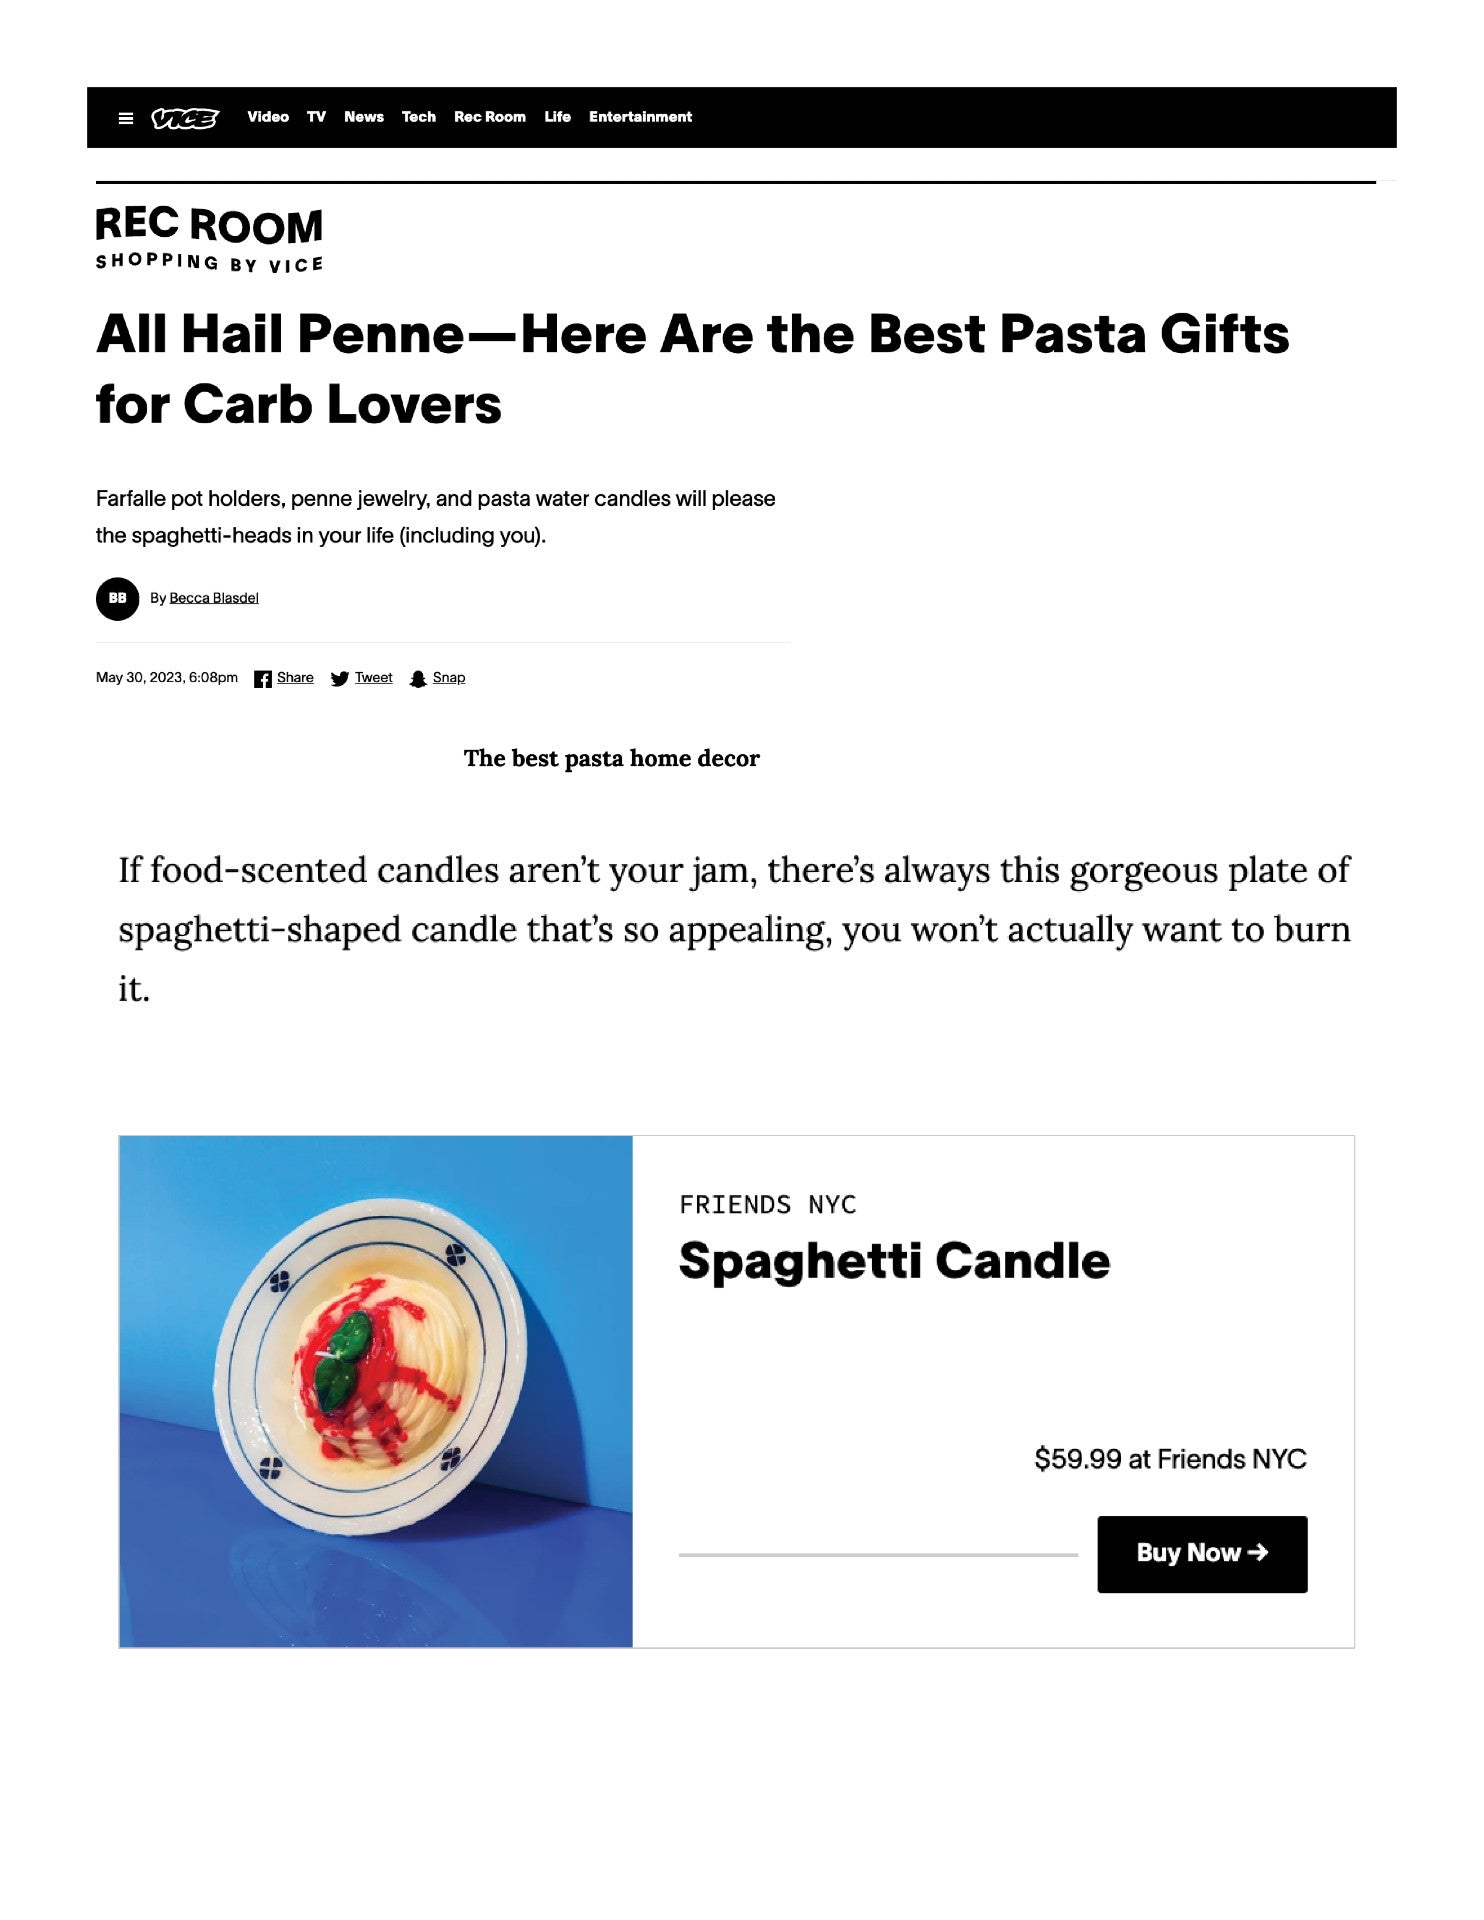 the 22 best pasta gifts vice.com